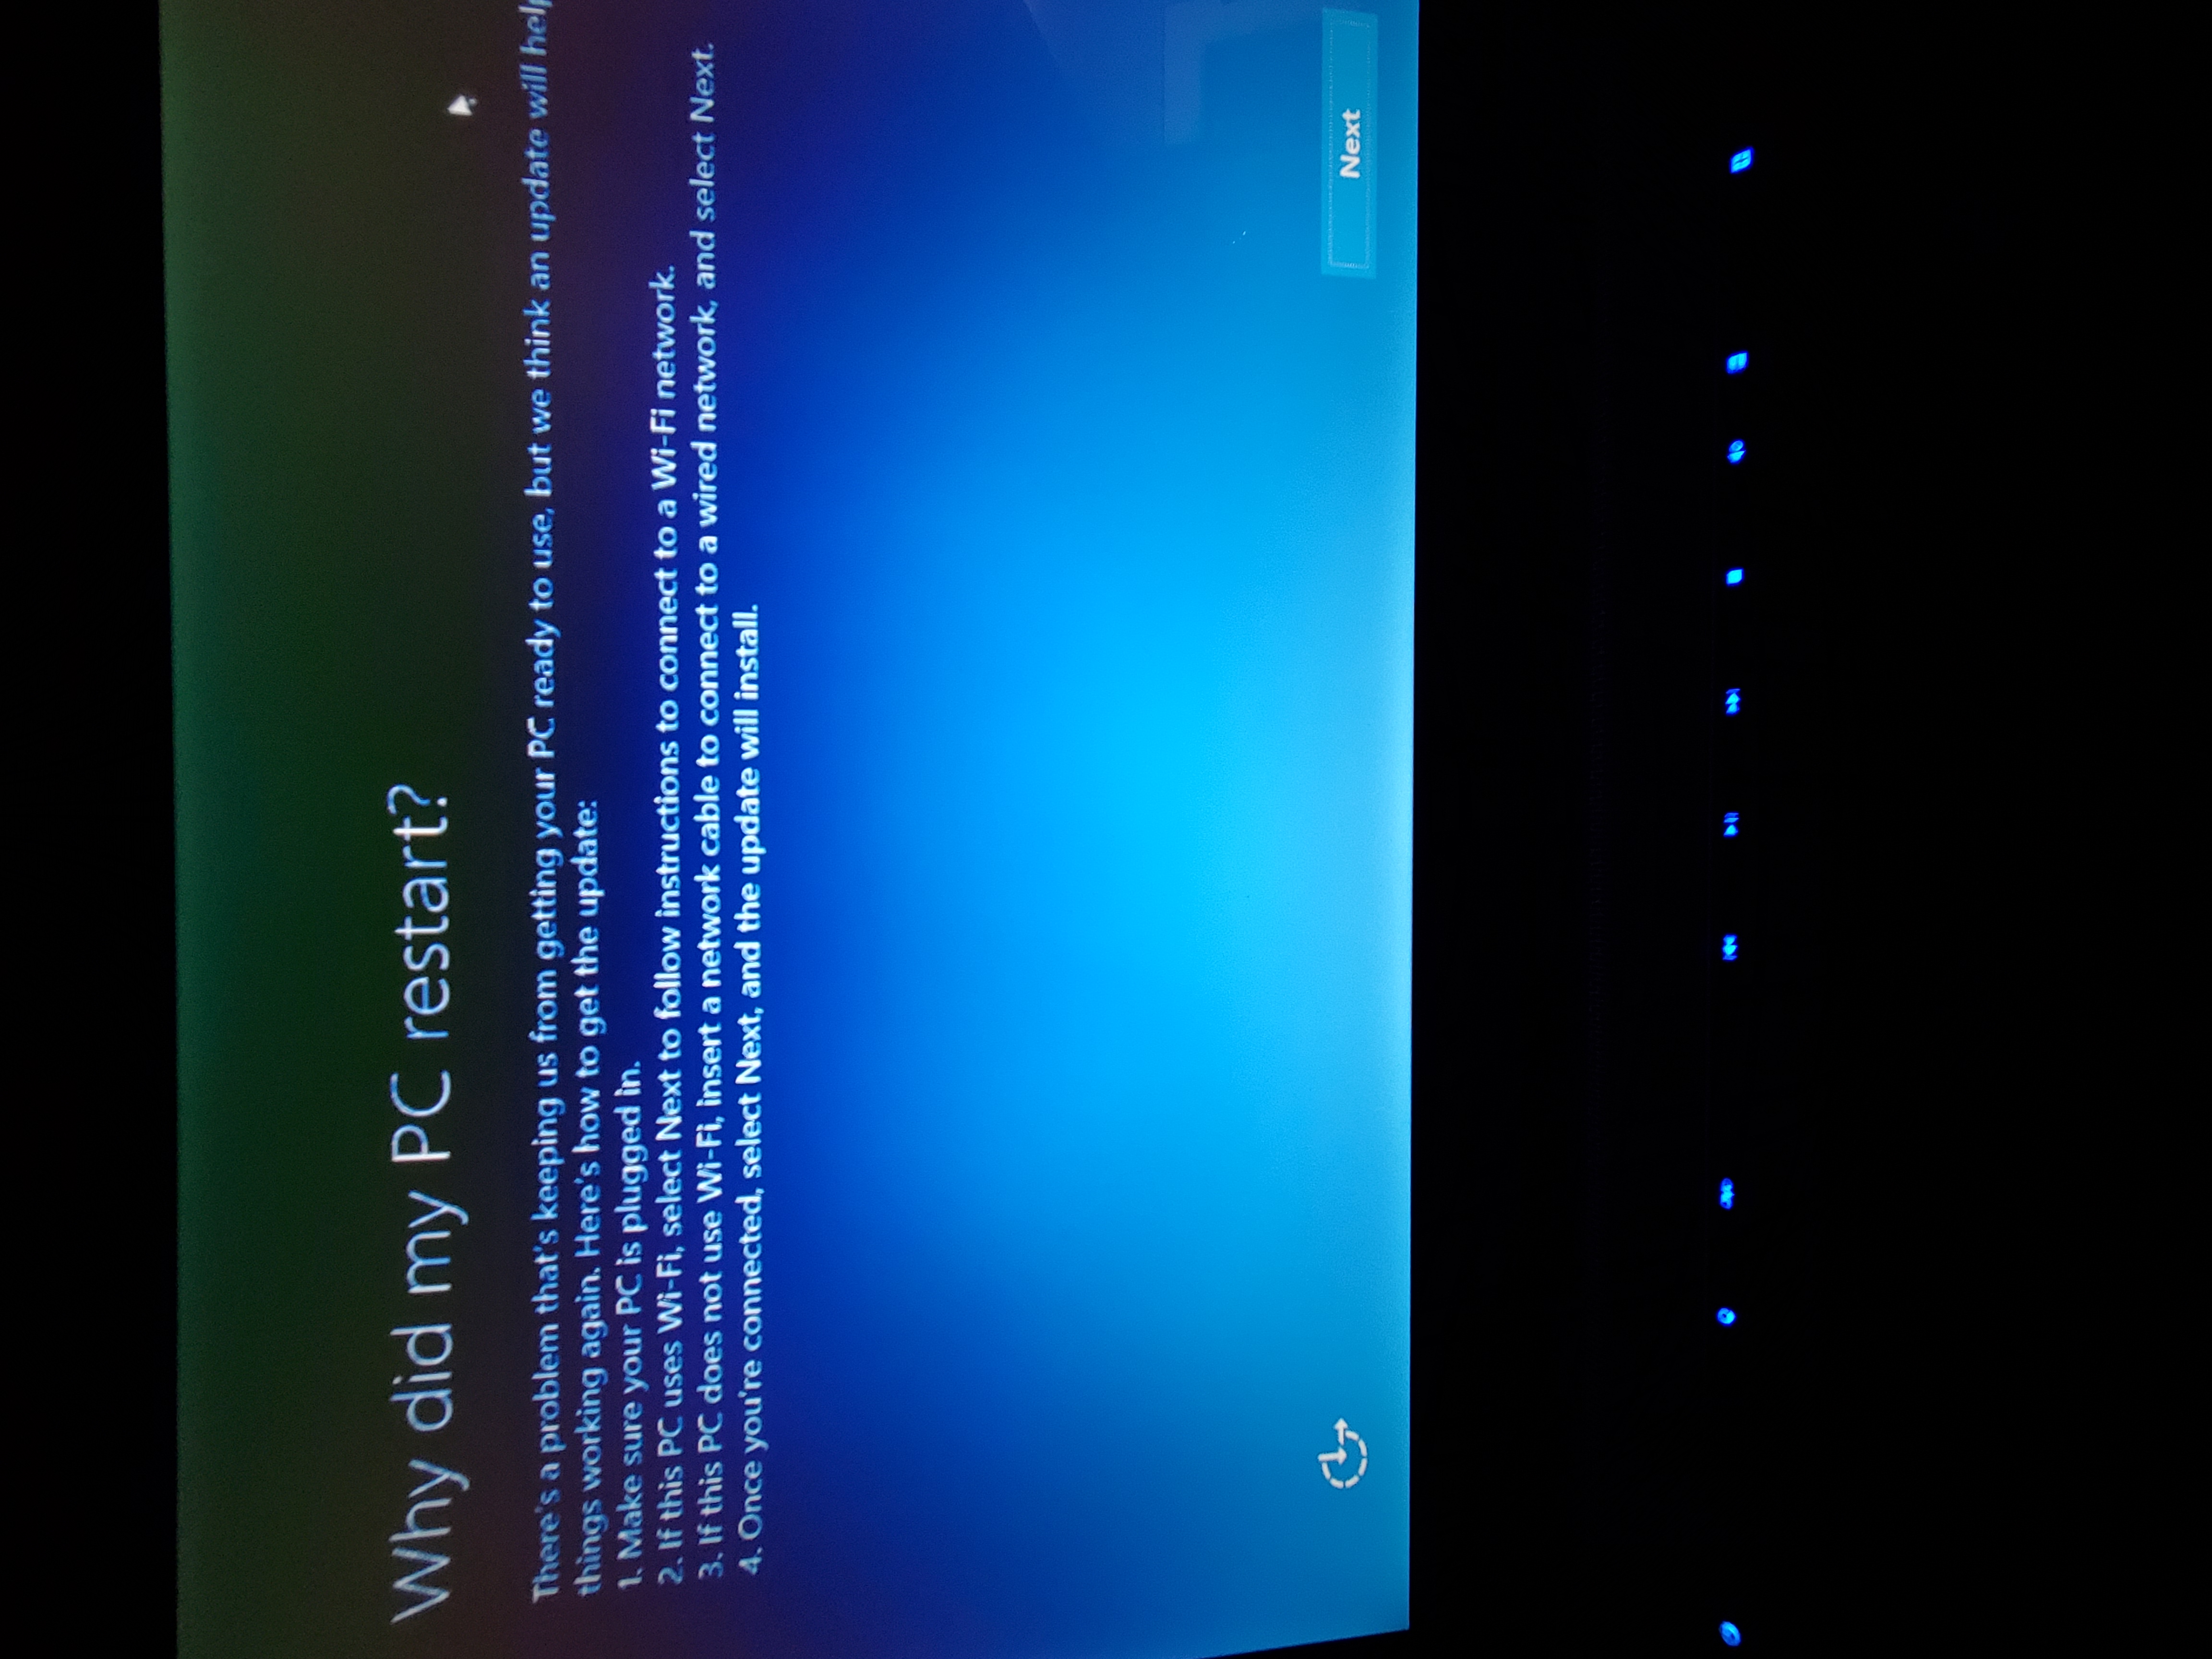 Win 10 Pro Install Stuck At Update Ask The System Questions